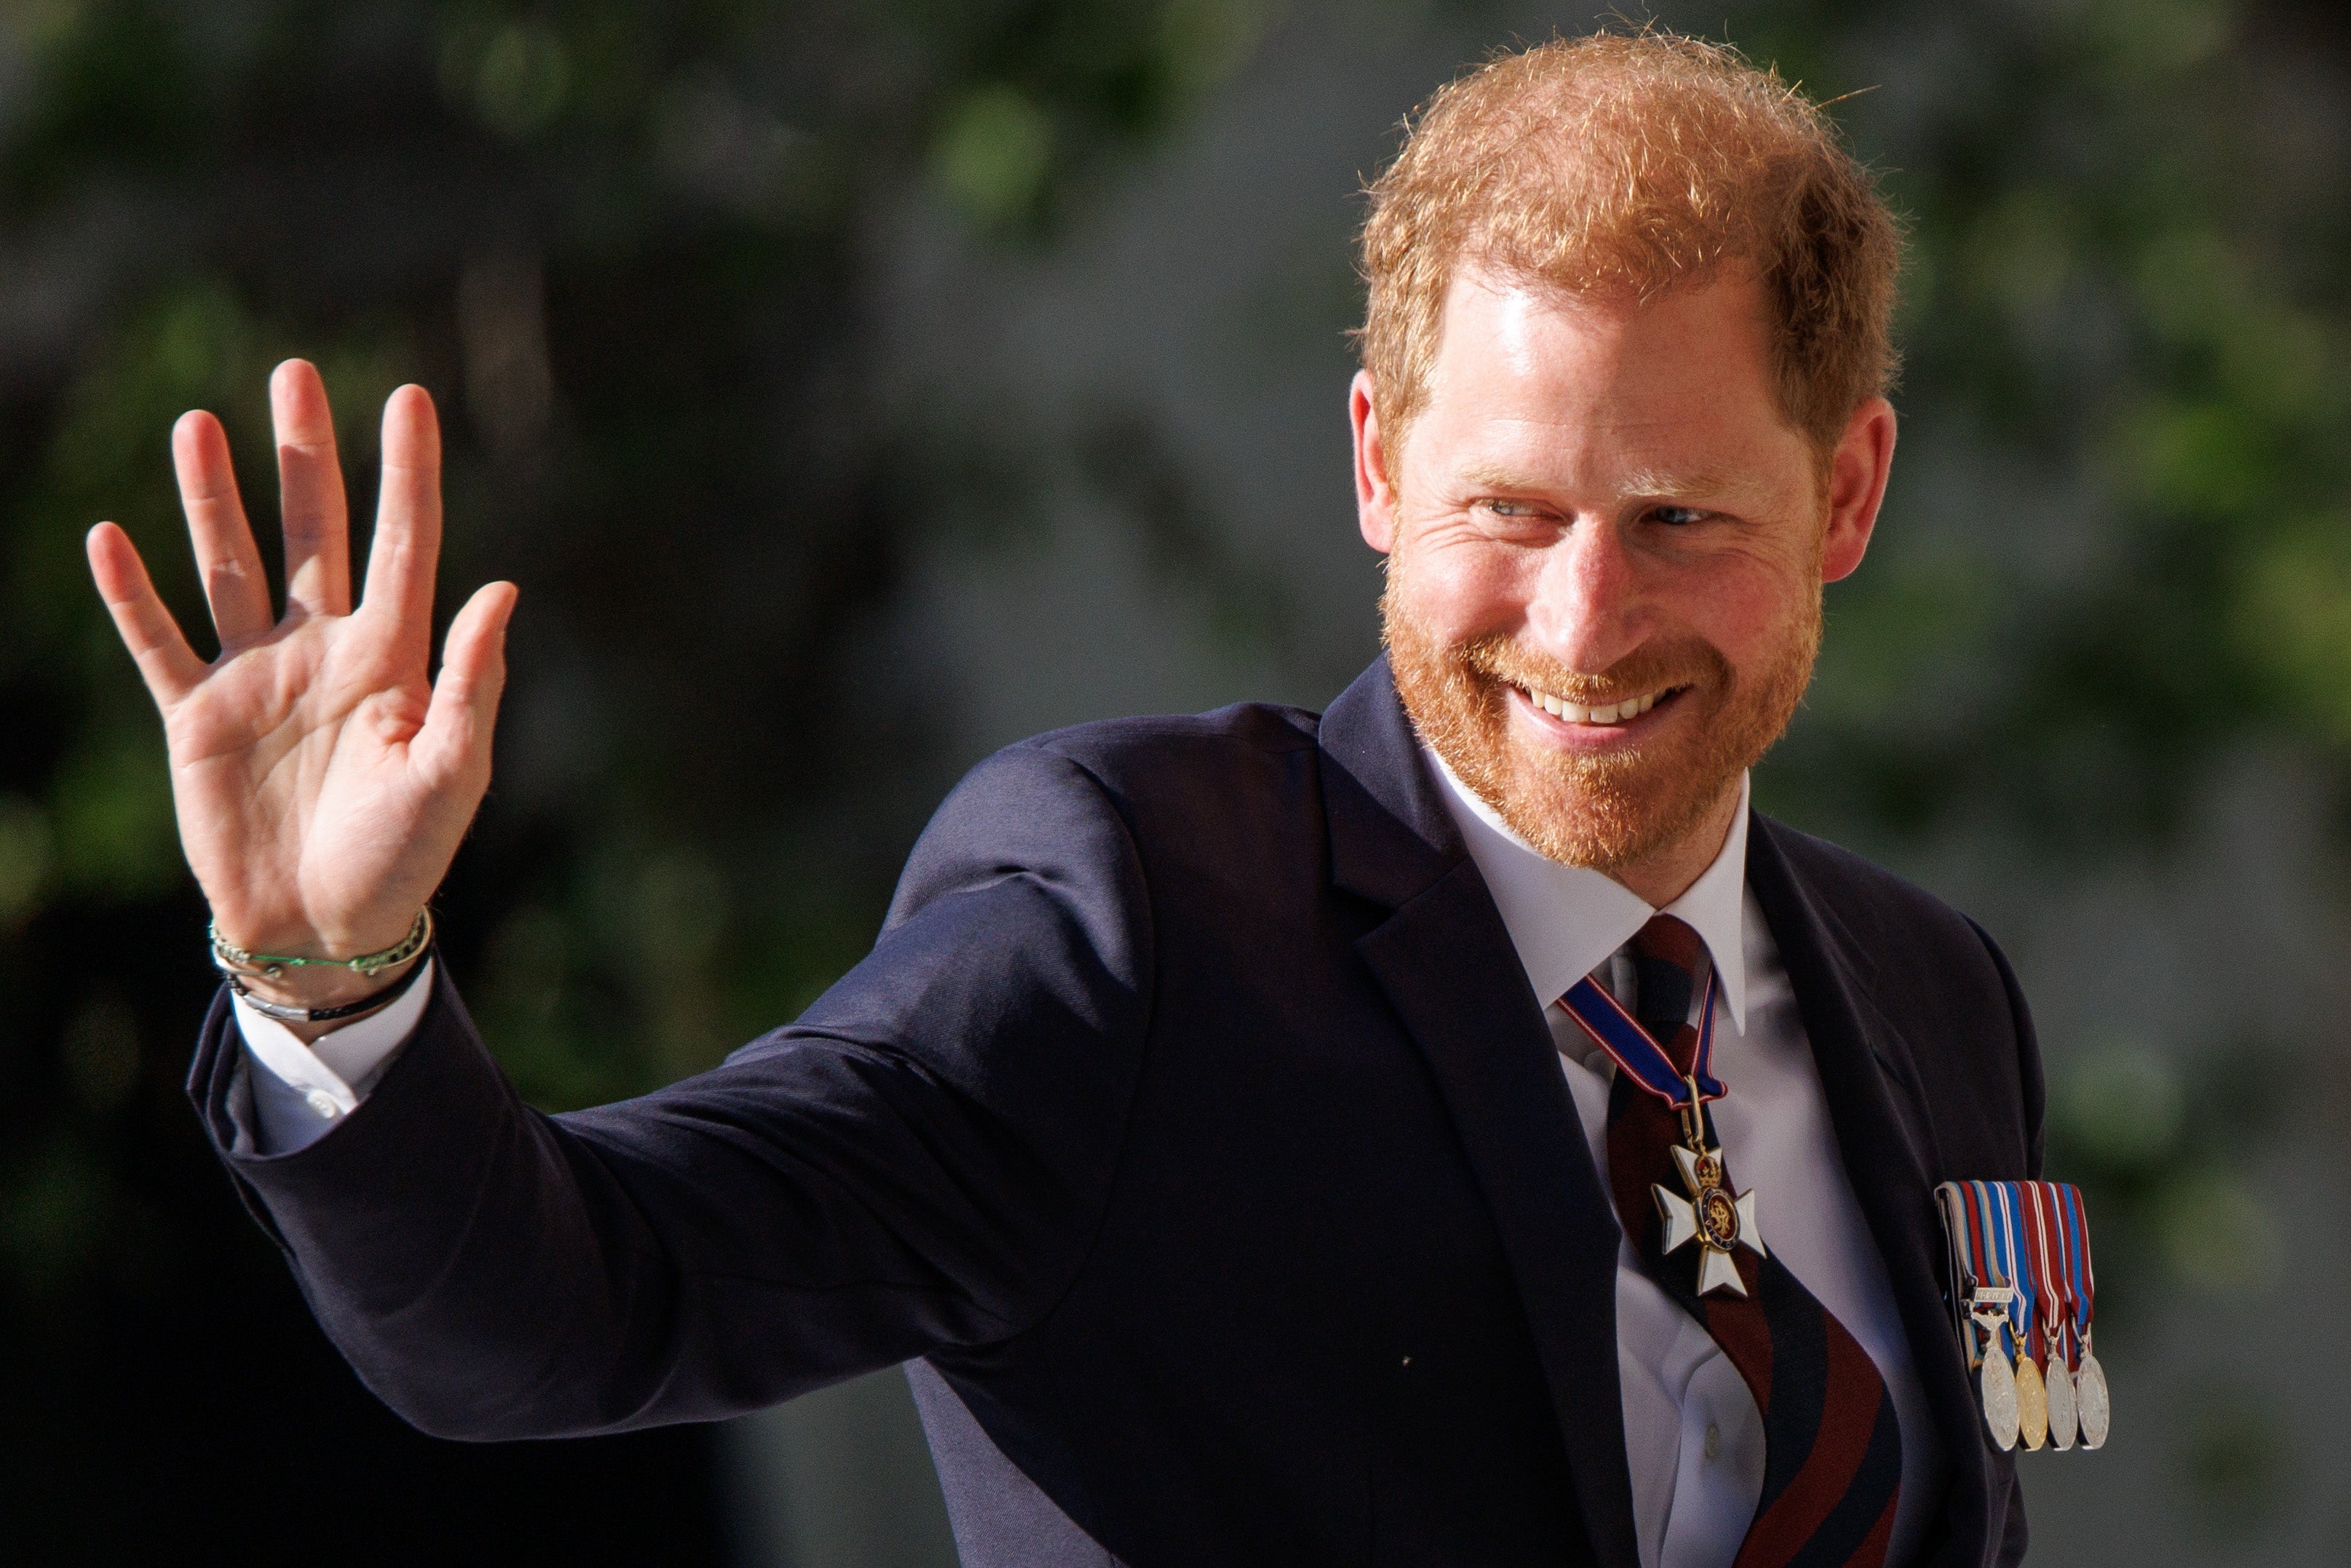 Prince Harry was all smiles as he arrived at the Invictus Games thanksgiving ceremony